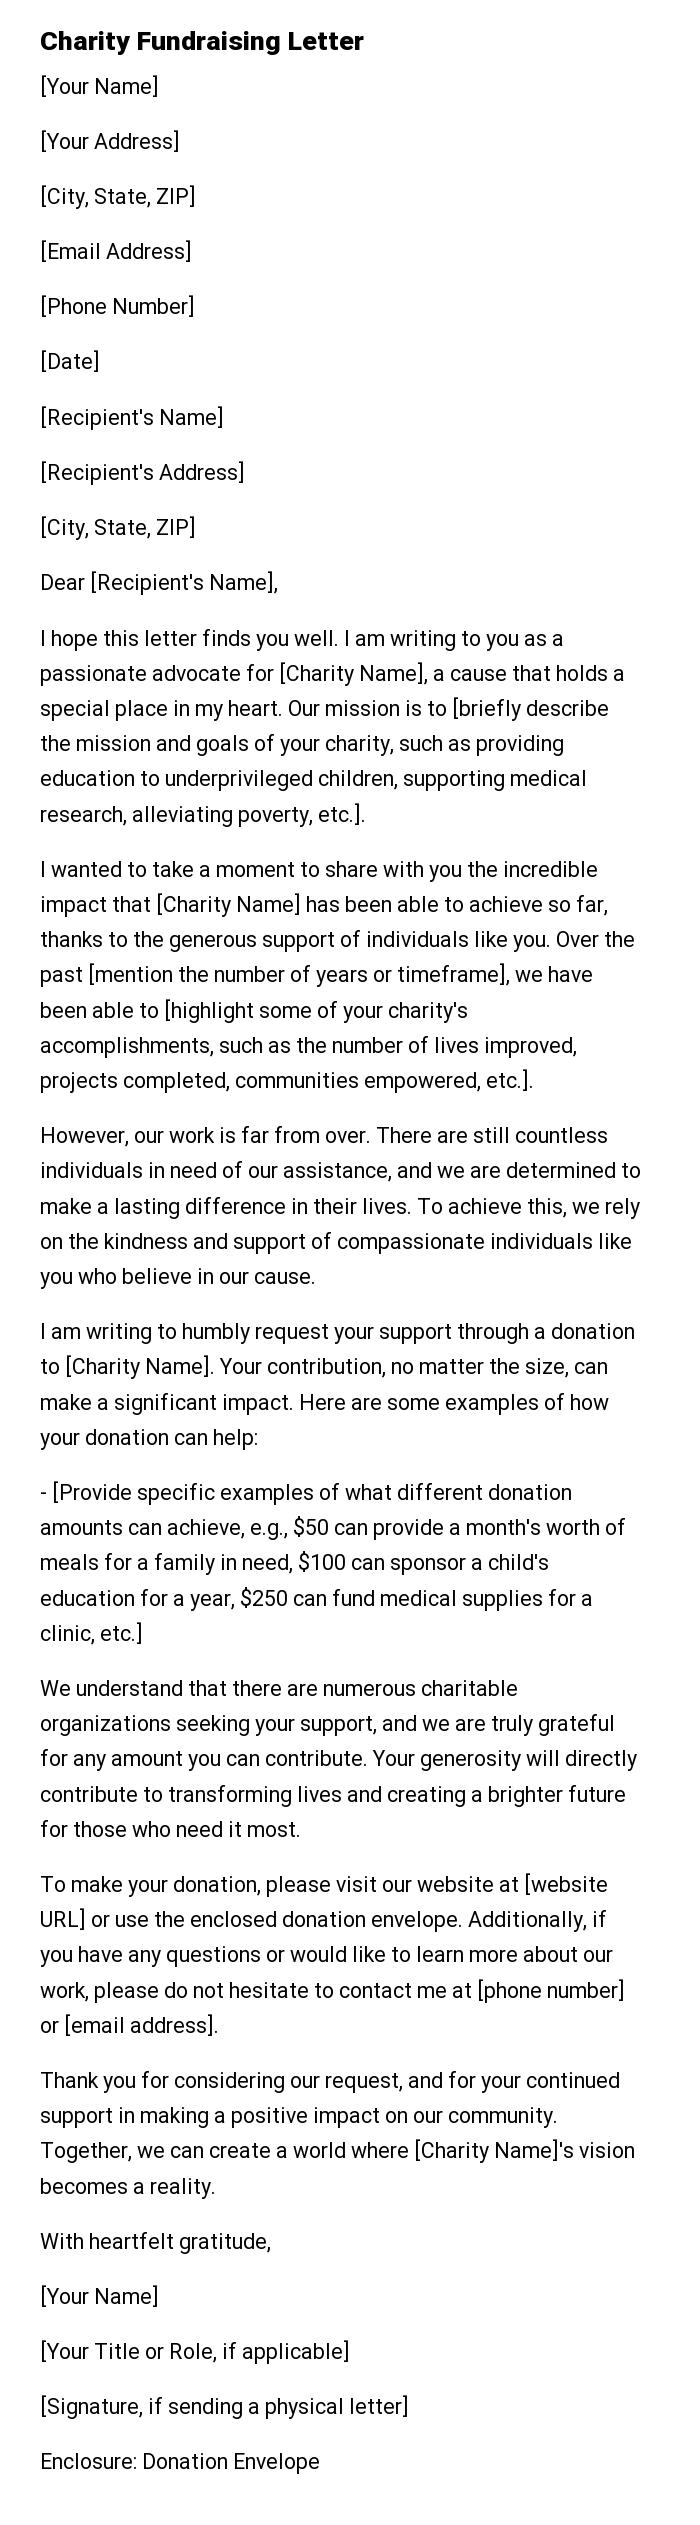 Charity Fundraising Letter